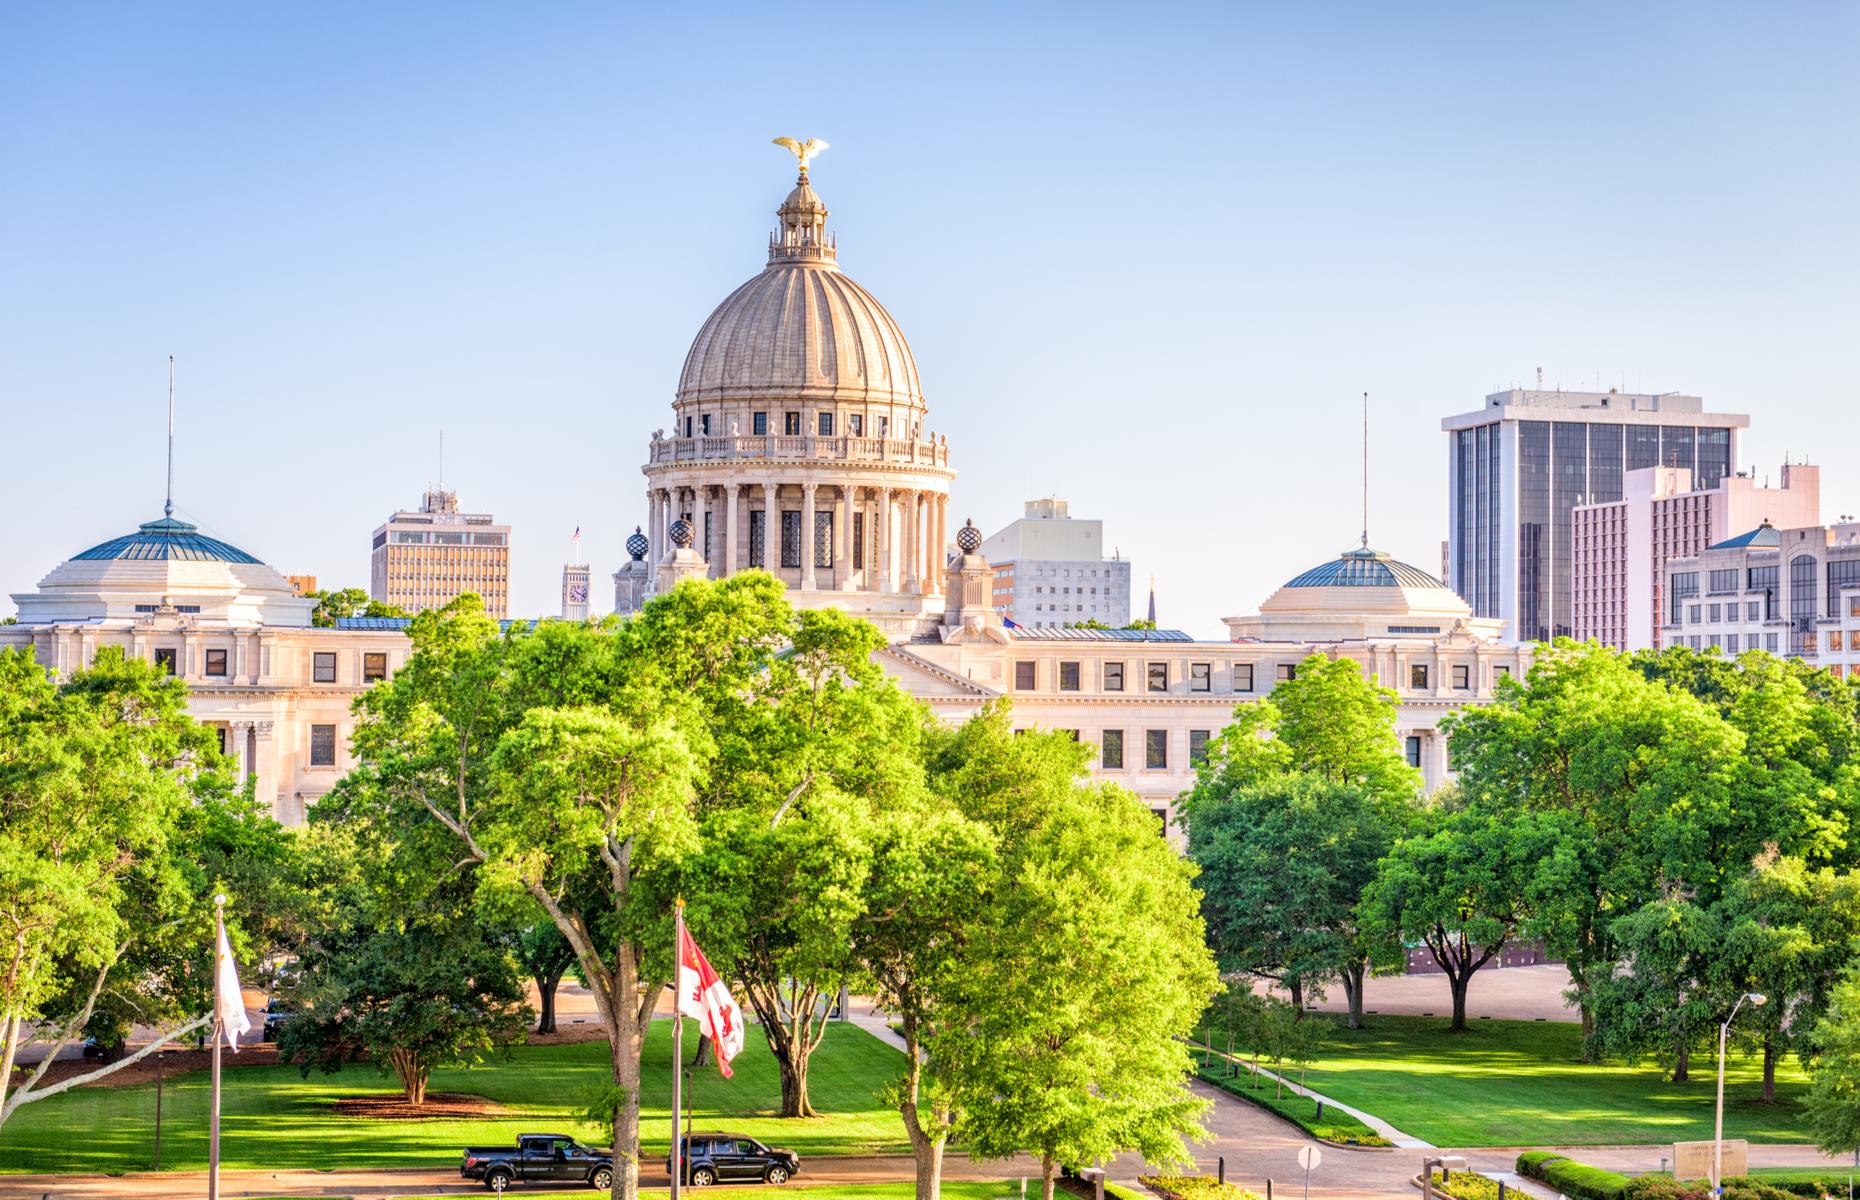 <p>Swerve sweltering summer weather by heading to the charming, culturally fascinating city of Jackson in spring, when the mercury <a href="https://www.usclimatedata.com/climate/jackson/mississippi/united-states/usms0175">regularly reaches 68°F (20°C)</a>. It’s still patio weather yet not too hot for wandering the tree-shaded streets and weaving in and out of blues clubs. Must-visits include the <a href="http://mcrm.mdah.ms.gov/">Mississippi Civil Rights Museum</a>, whose arresting displays include plinths representing lynching victims.</p>